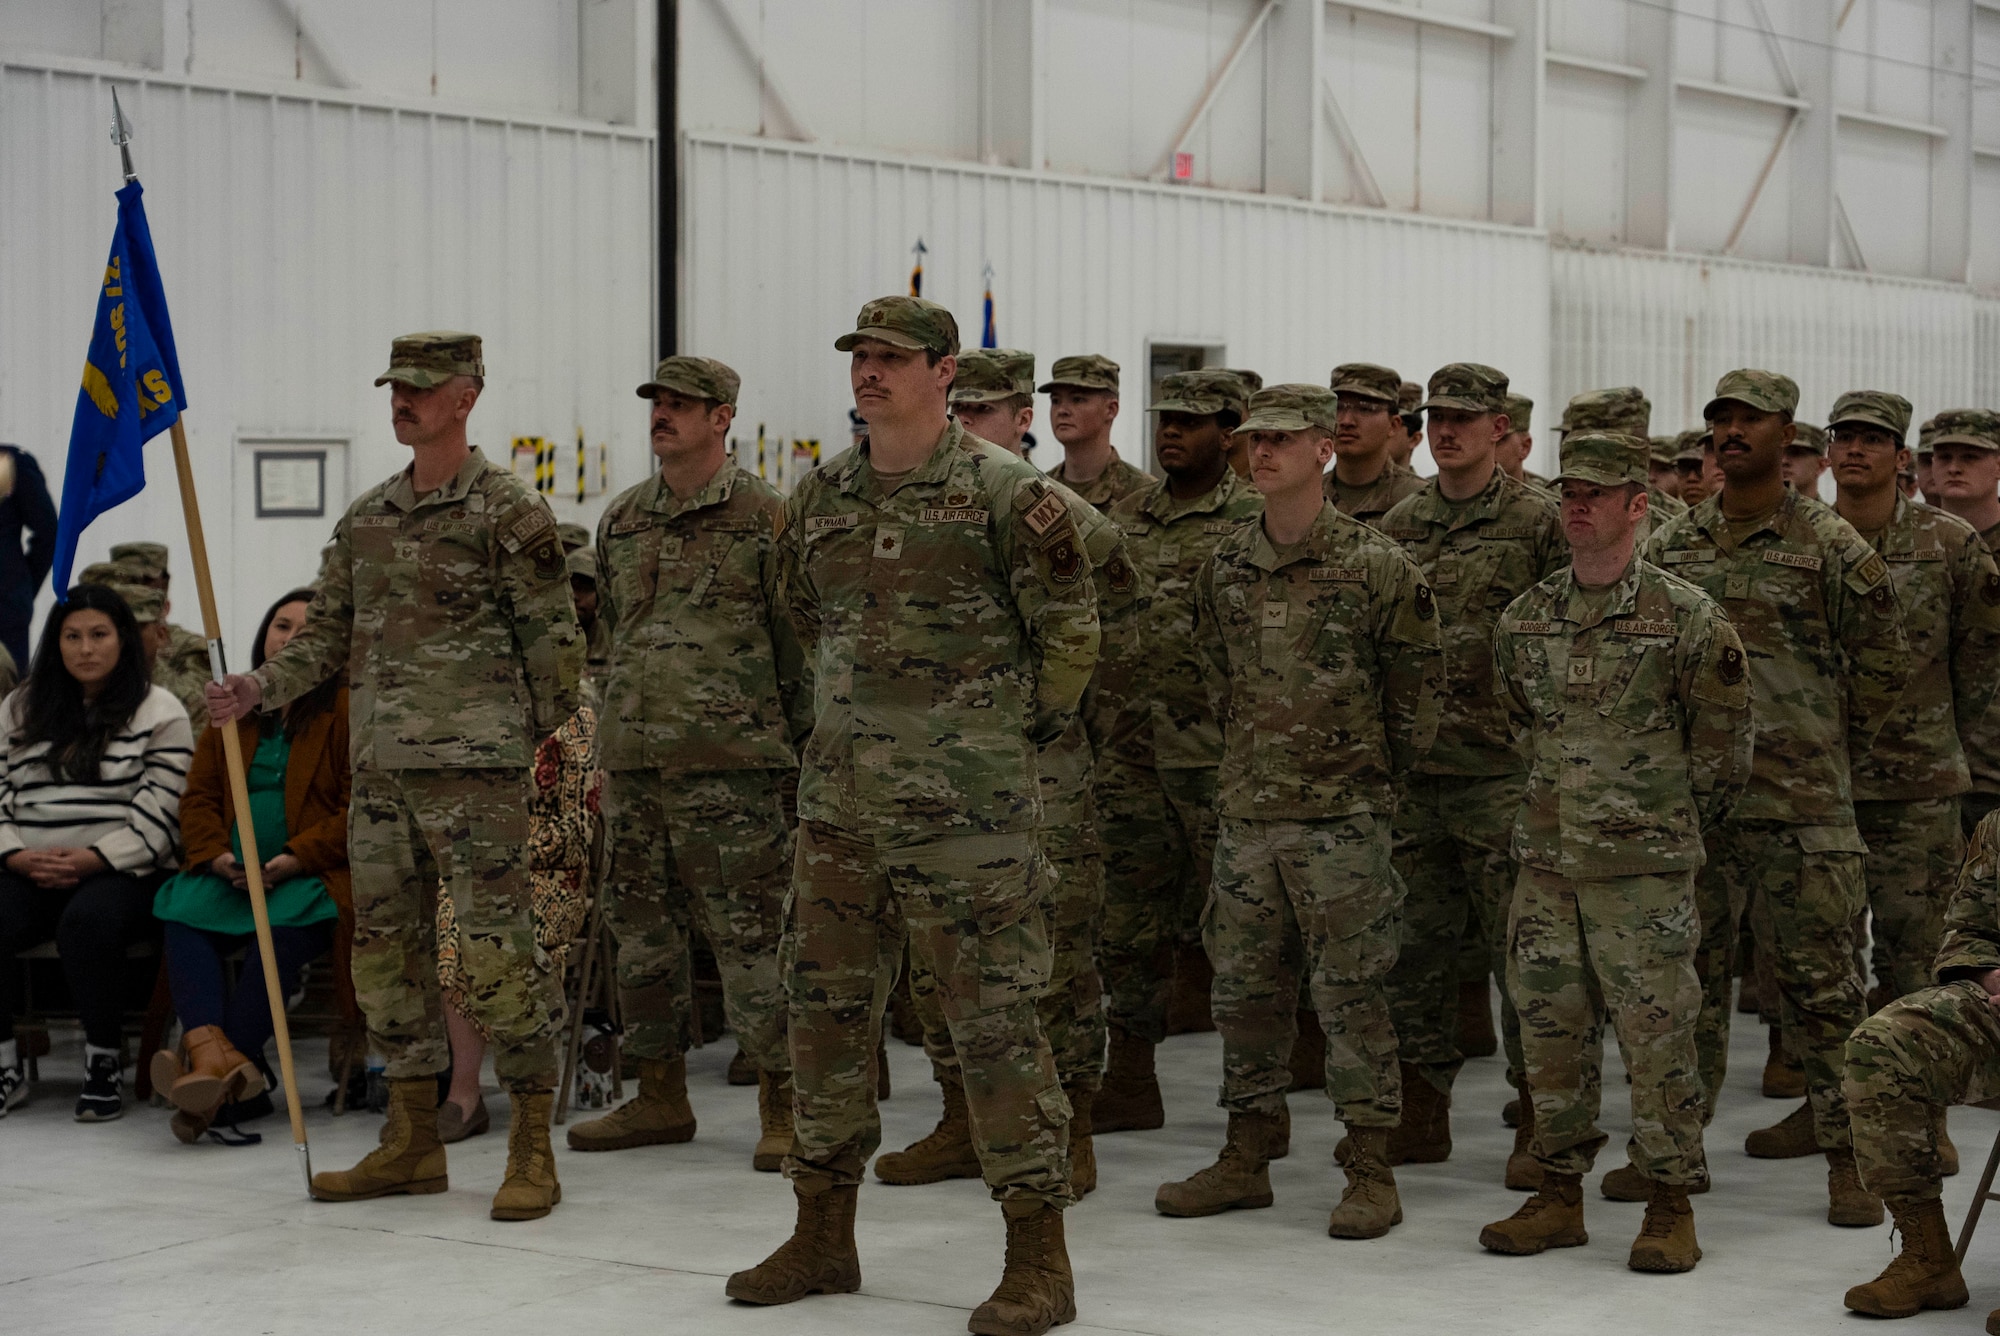 Members of the 27th Special Operations Aircraft Maintenance Squadron stand in formation as they are redesignated to the 16th Special Operations Aircraft Maintenance Squadron at Cannon Air Force Base, N.M., March 15, 2024. The redesignation was enacted to better align the unit with its identity and mission: to develop elite maintainers ready to generate safe, reliable aircraft to execute special operations missions. (U.S. Air Force photo by Staff Sgt. Nicholas Swift)